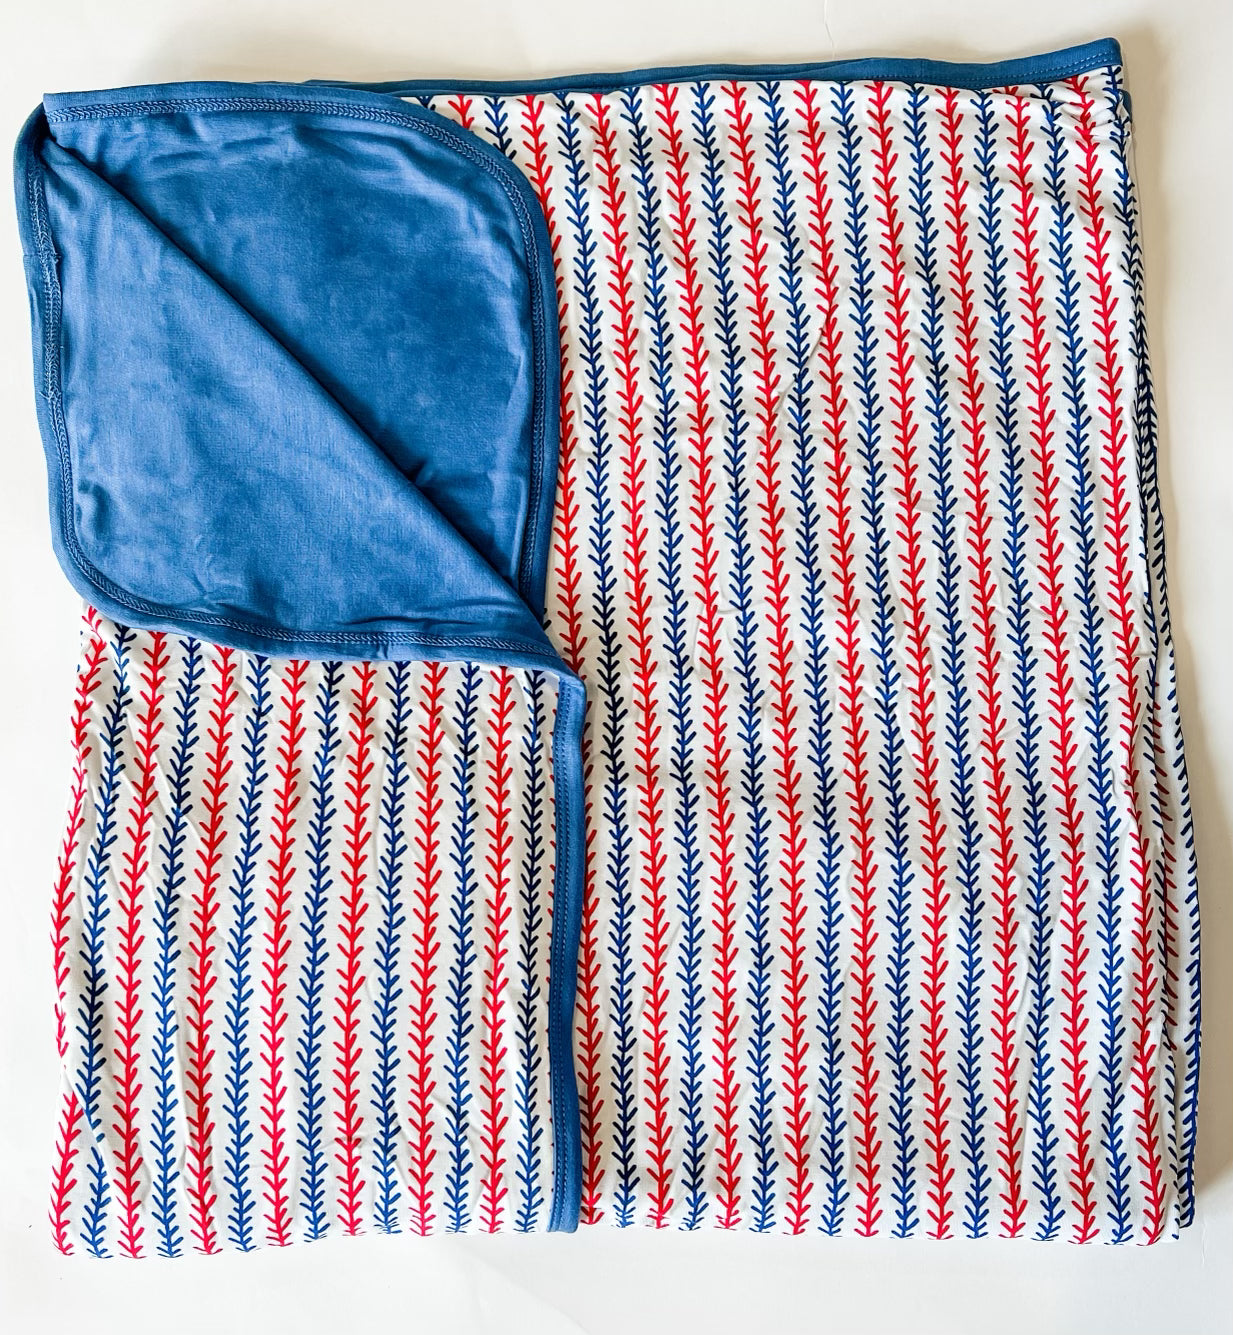 Sweet Snuggles Three Layer Bamboo Blanket - 7th Inning Stretch